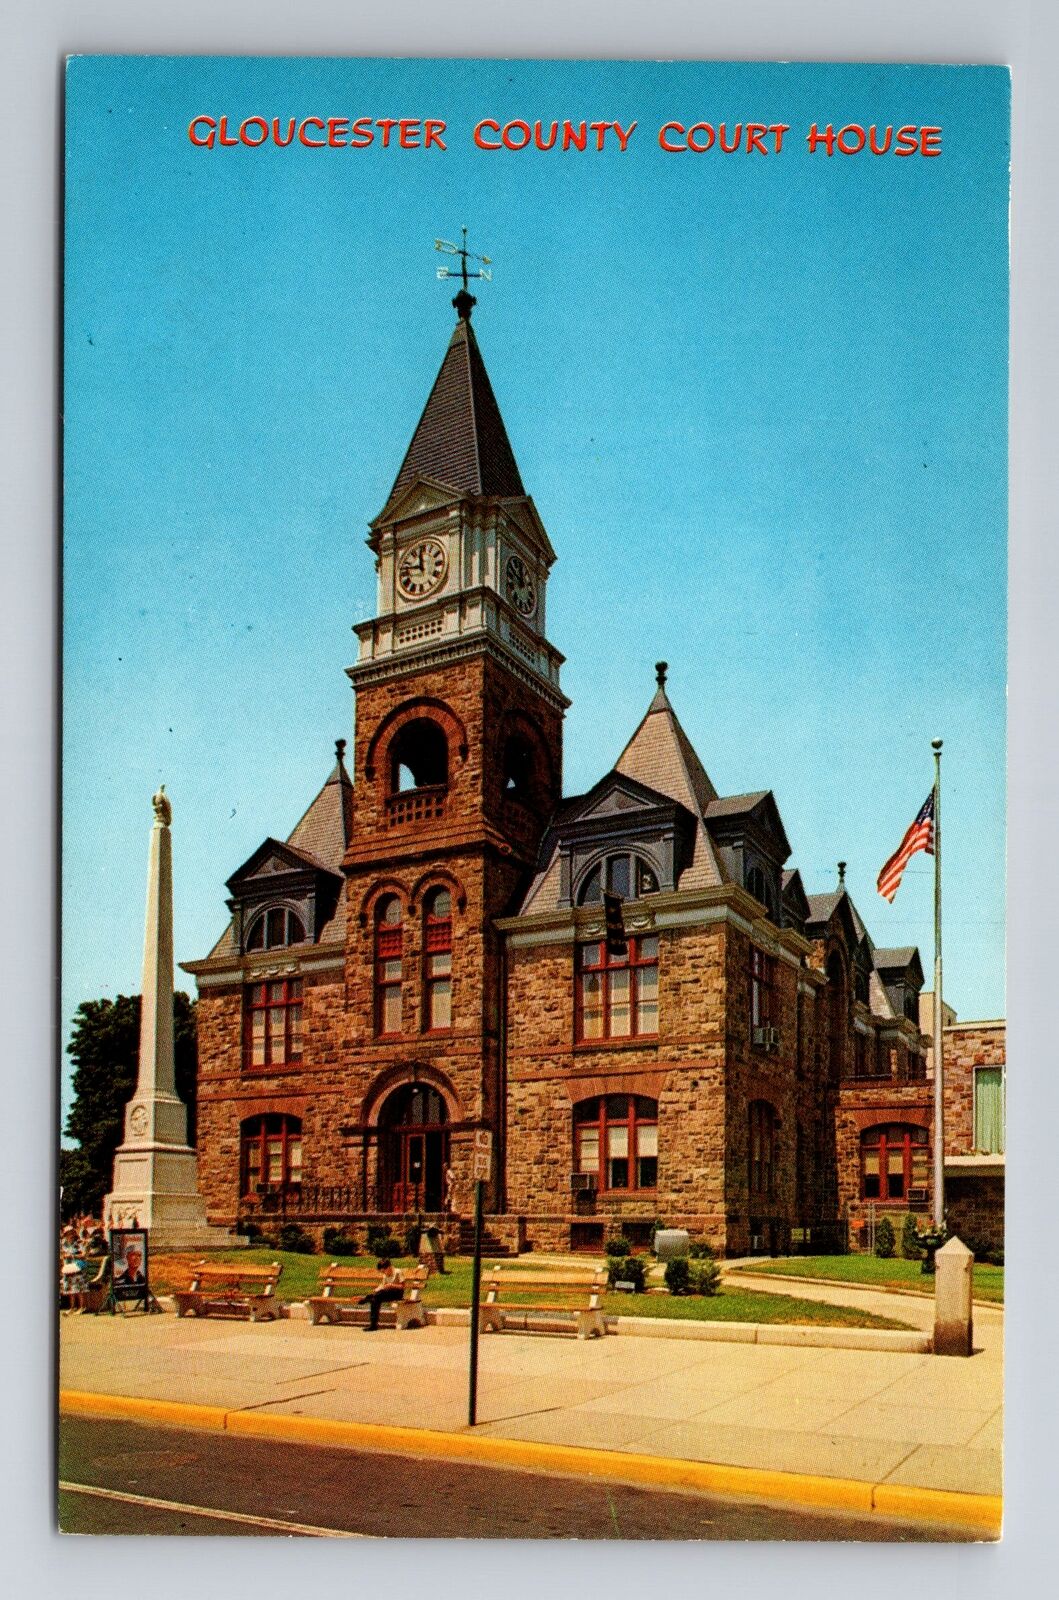 Woodbury NJ-New Jersey, Gloucester County Courthouse, Vintage Postcard